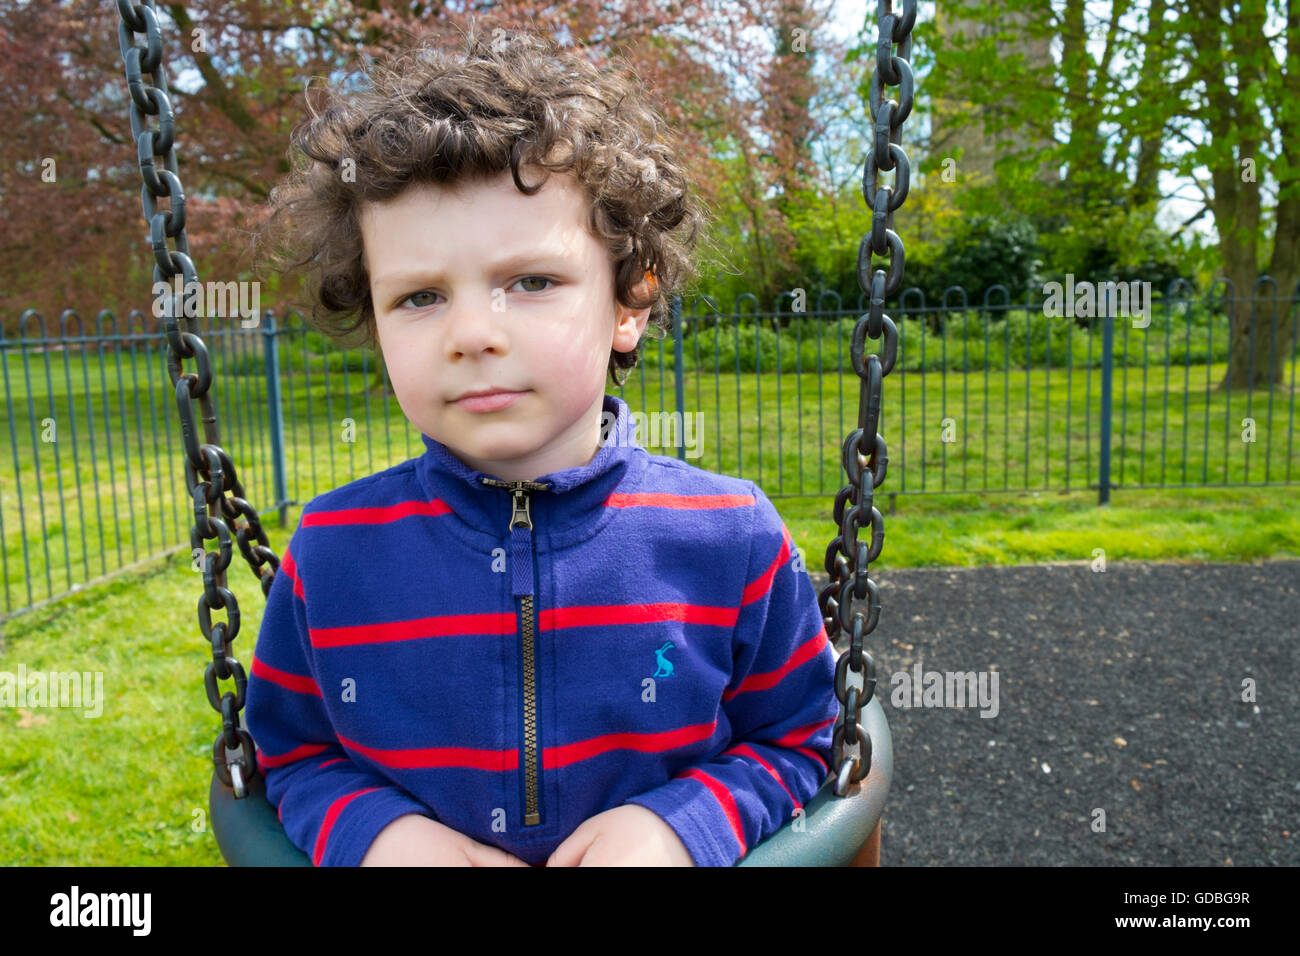 Young boy looking thoughtful on a playground swing Stock Photo